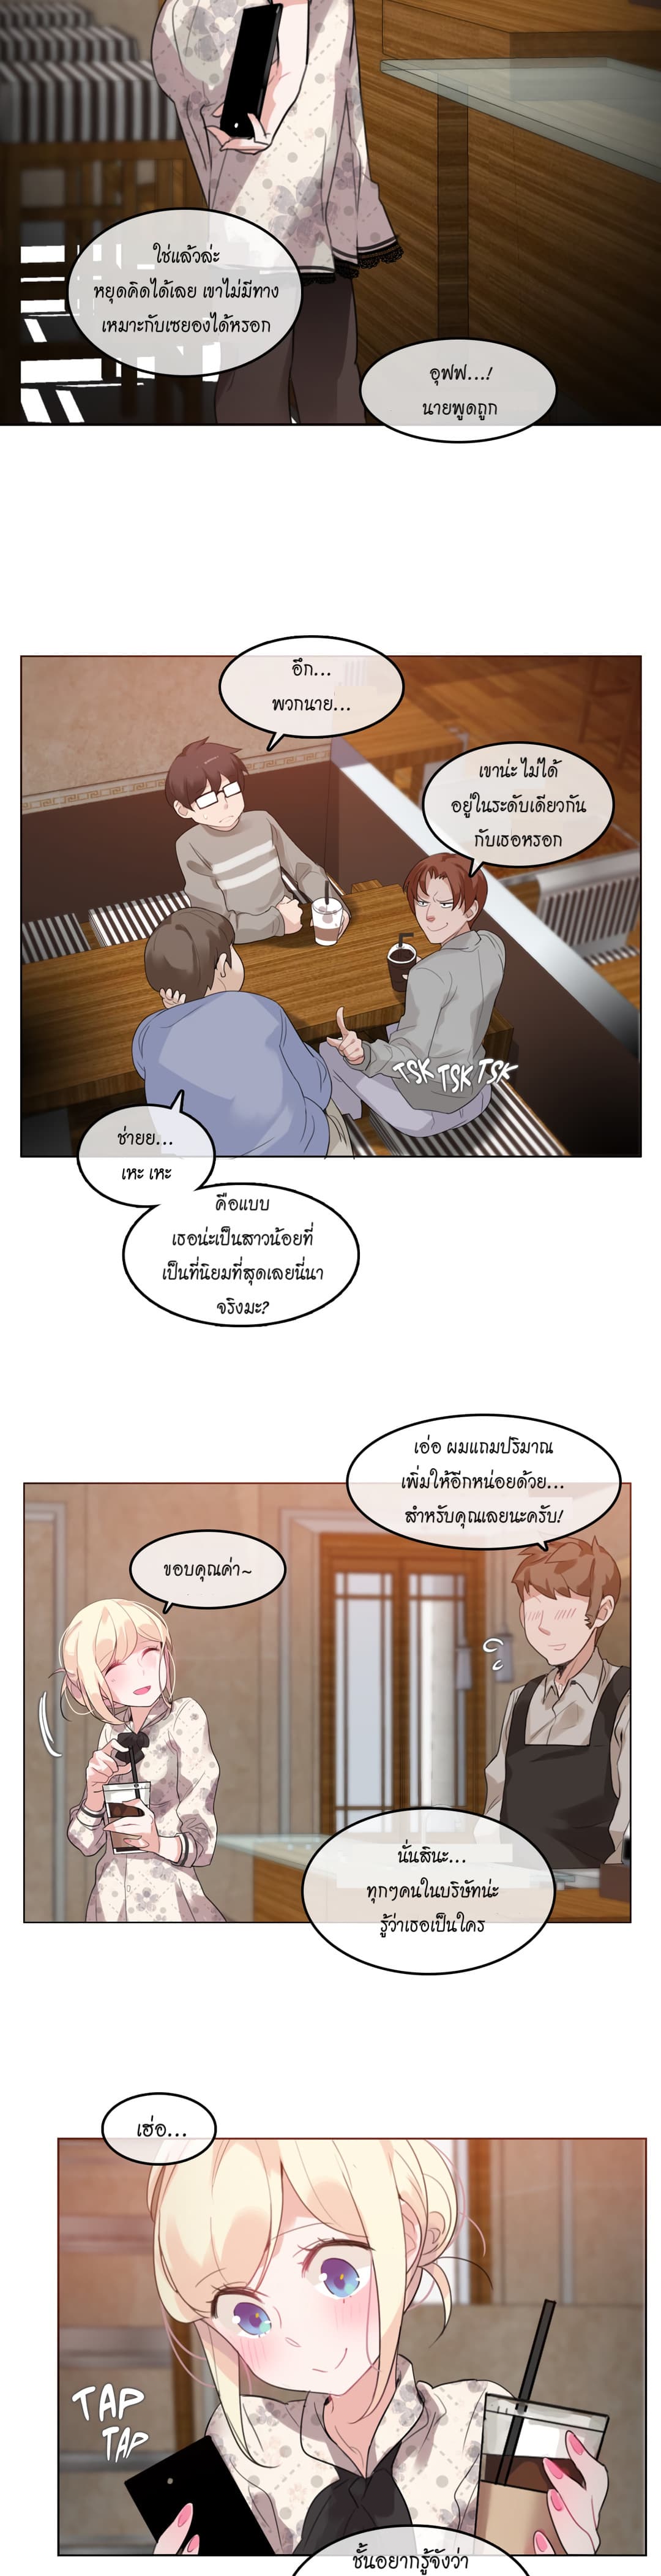 A Pervert’s Daily Life 28 (2)